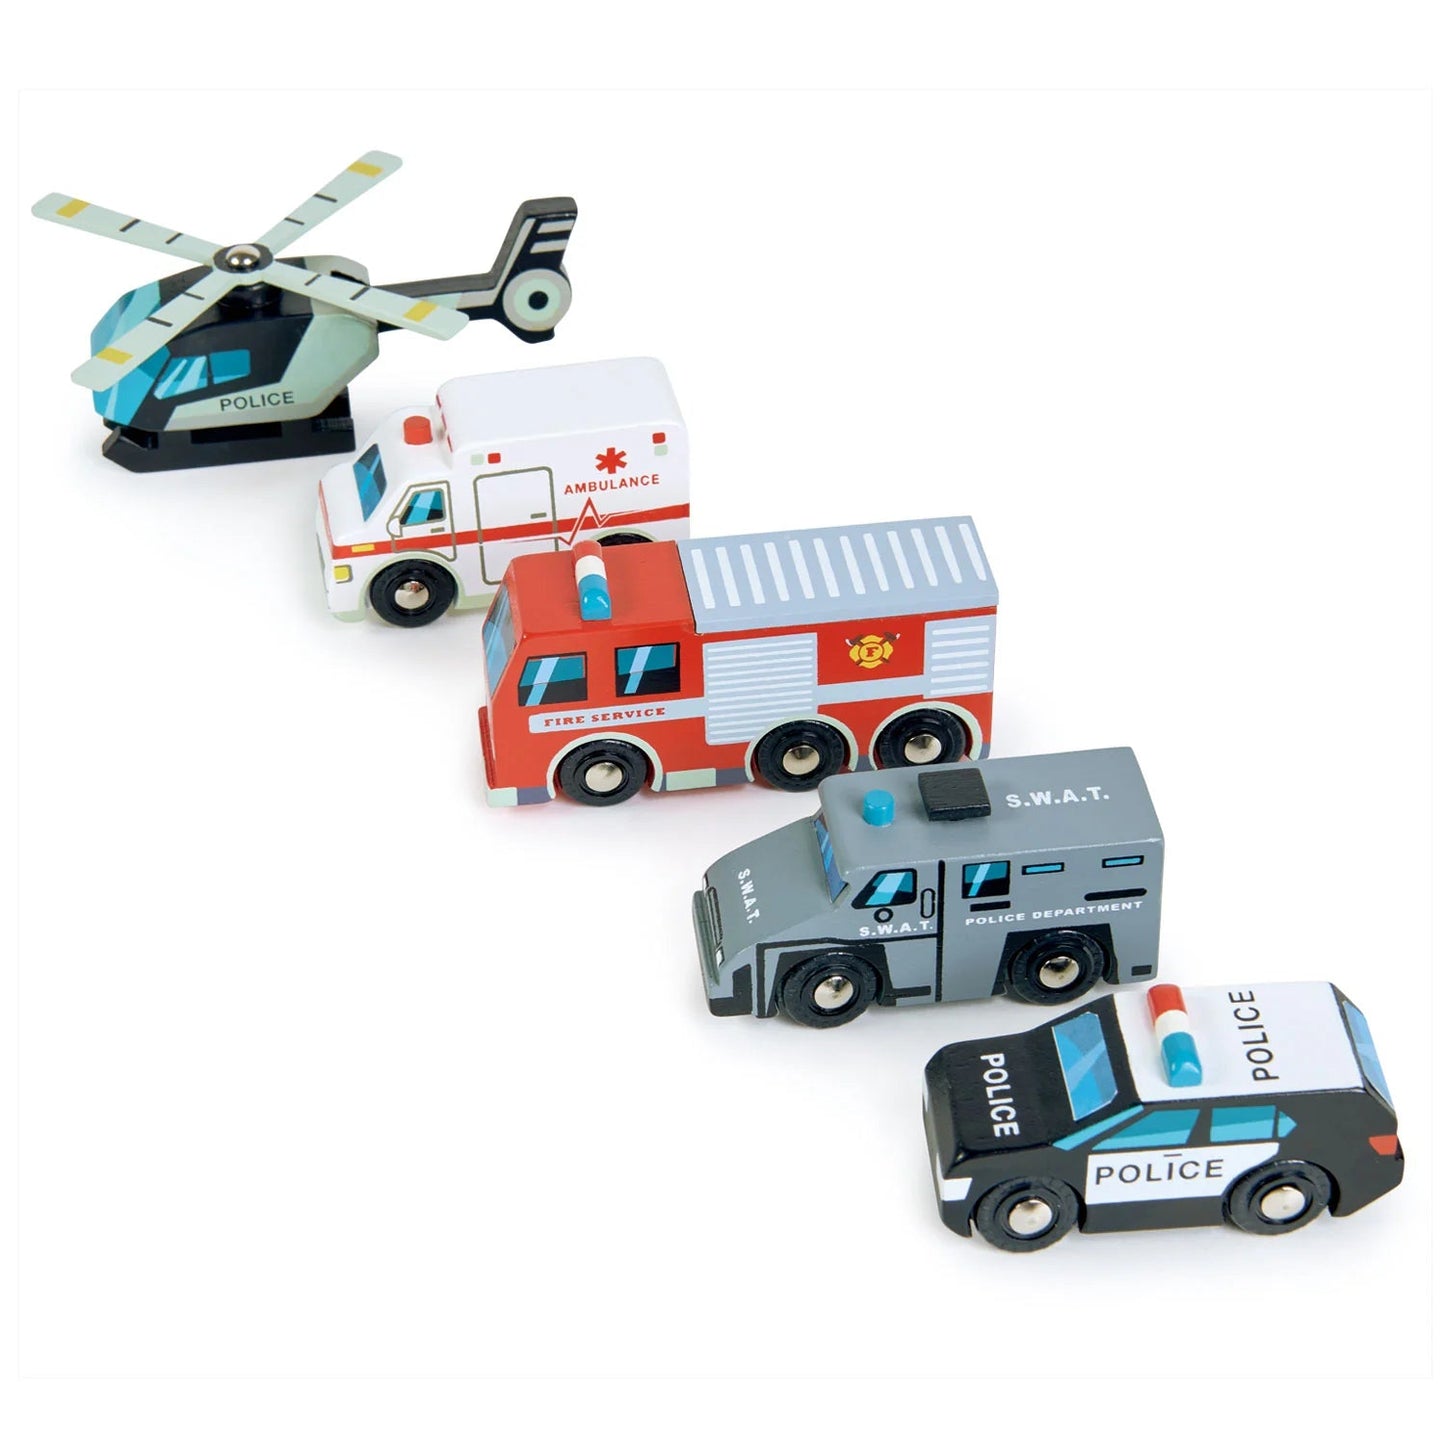 A fantastic set of 5 emergency vehicles with standard wheel width that fits on all train tracks. Set includes; helicopter with rotating blades, ambulance, fire engine, police car and S.W.A.T car. 